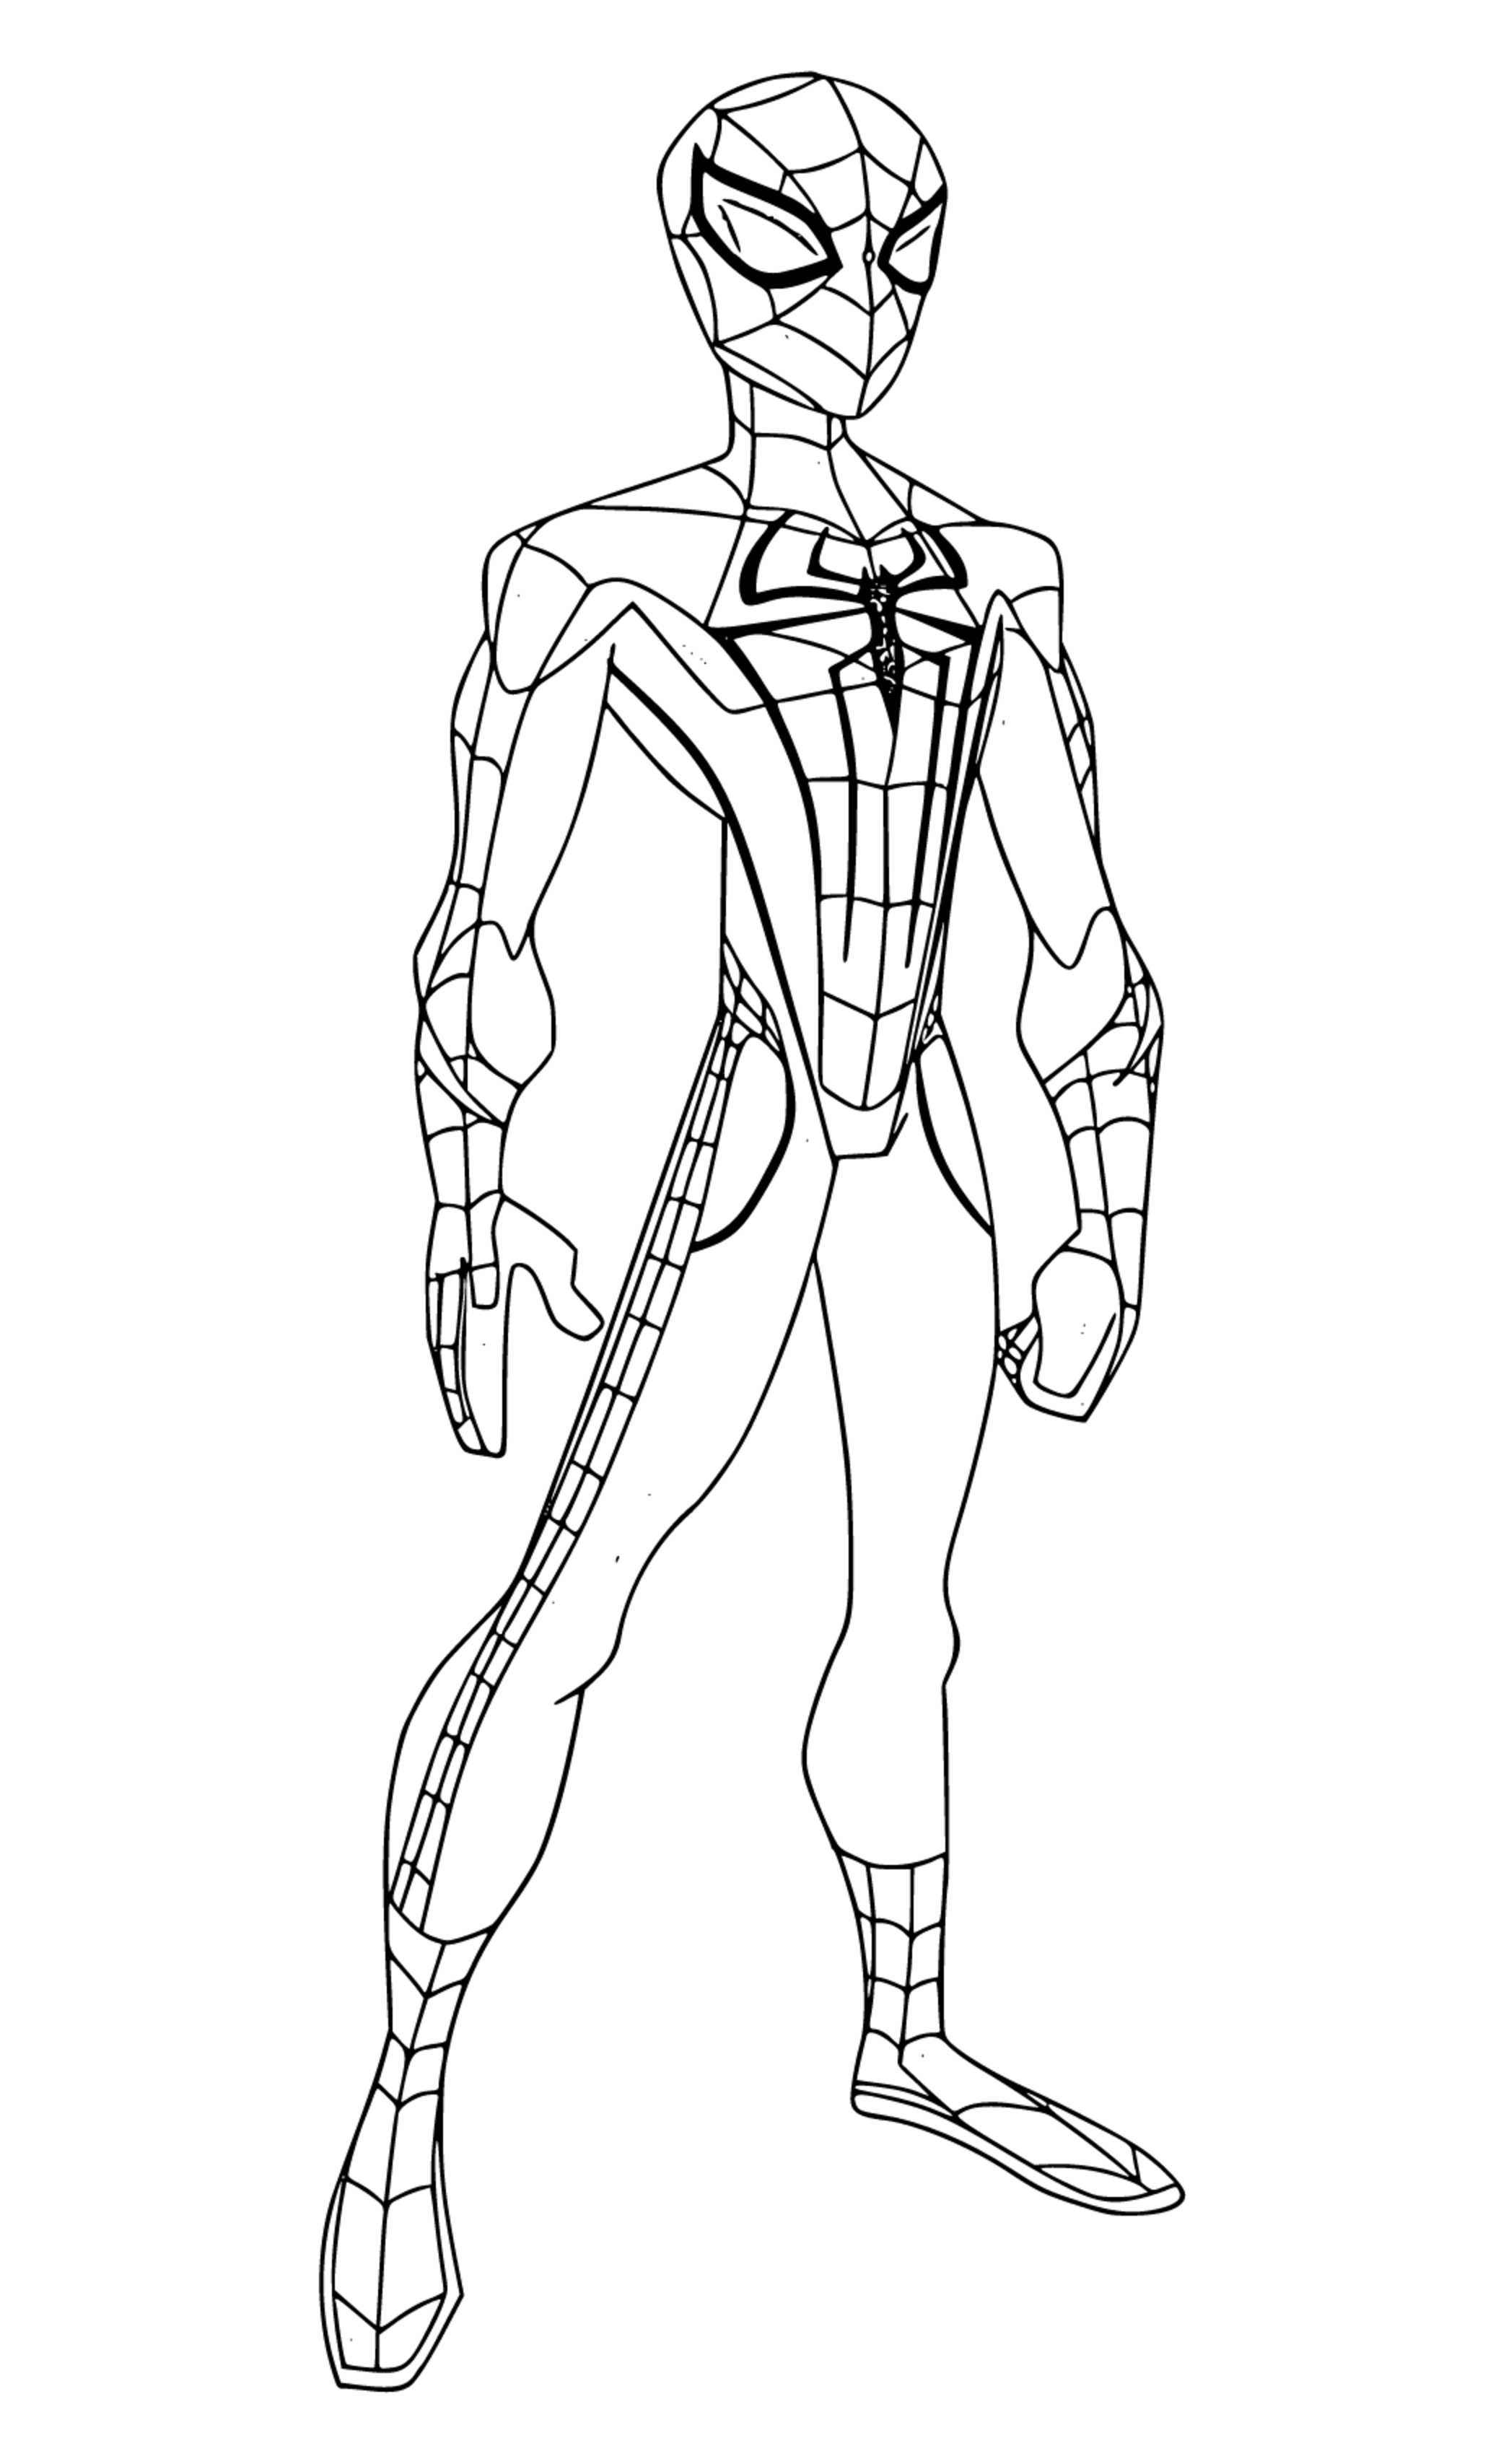 Iron Spiderman Coloring Page for Children Printable - SheetalColor.com